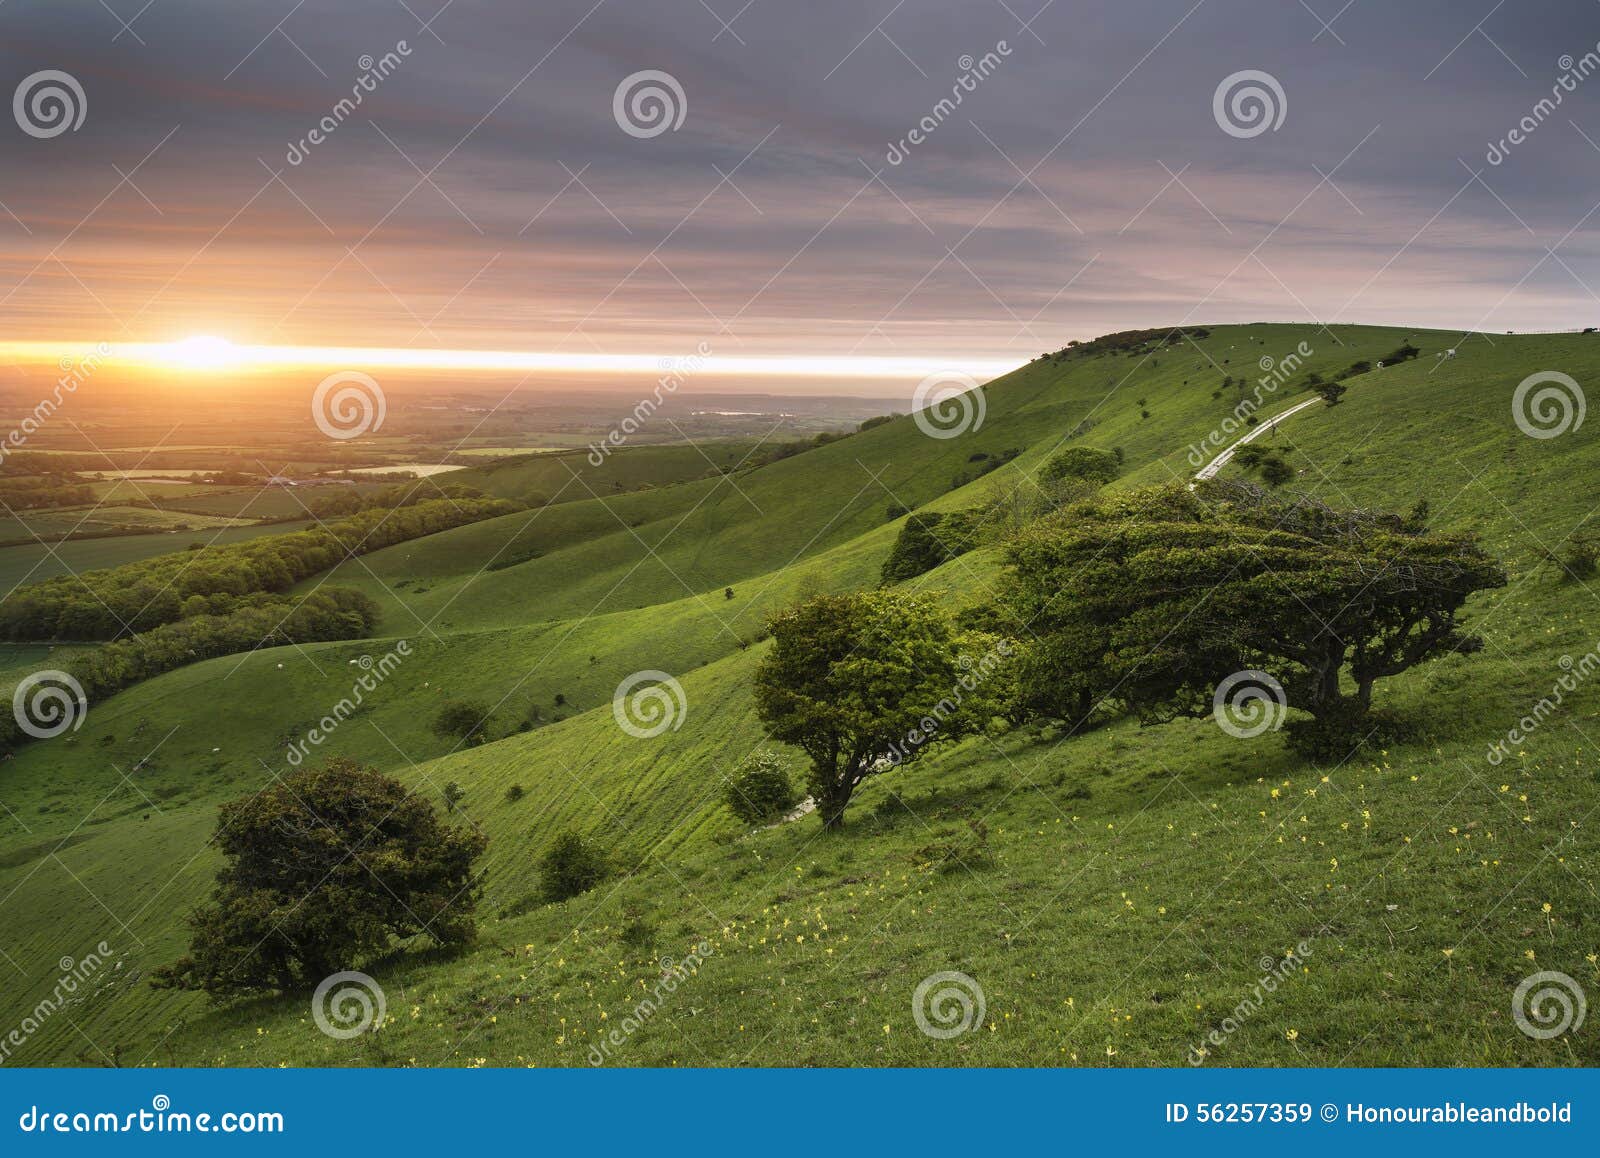 morning over rolling english countryside landscape in spring